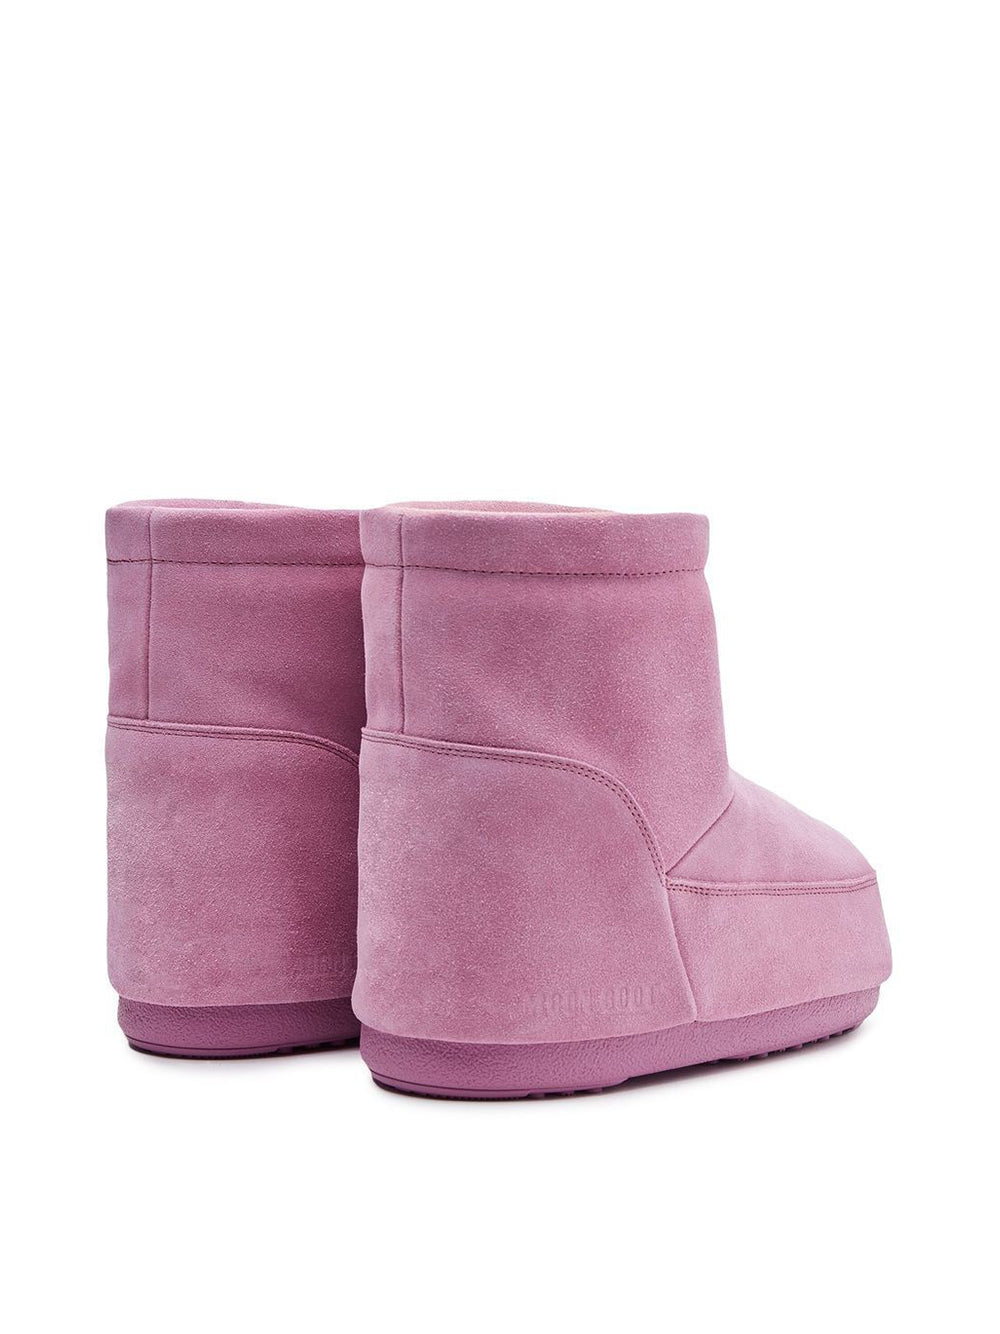 Low icon boot nolace suede pink